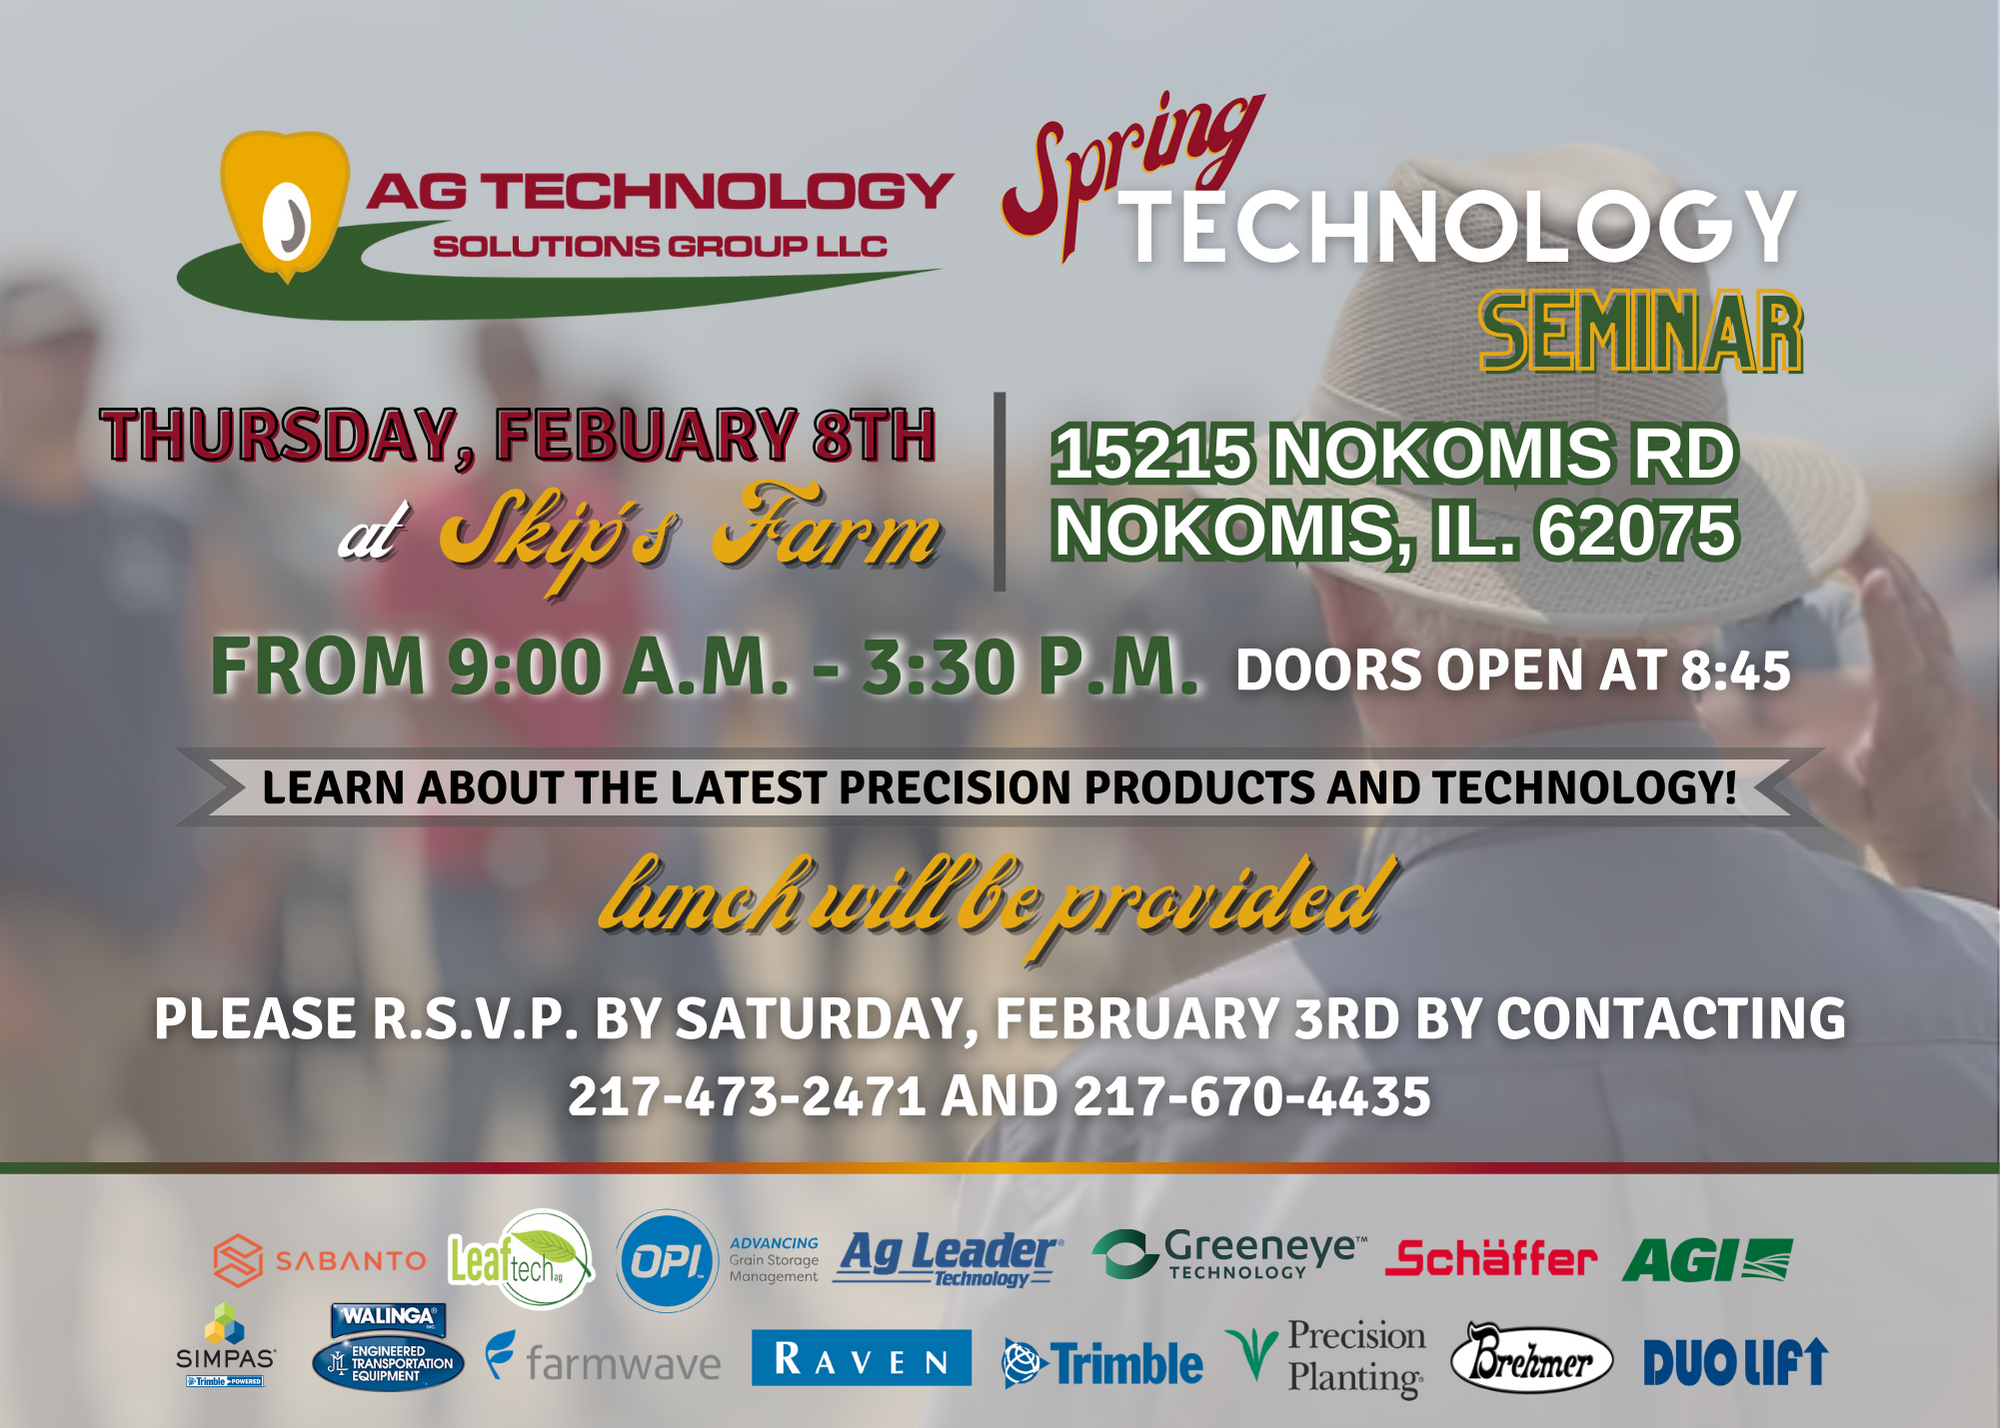 Ag Technology Solutions Group Spring Technology Seminar